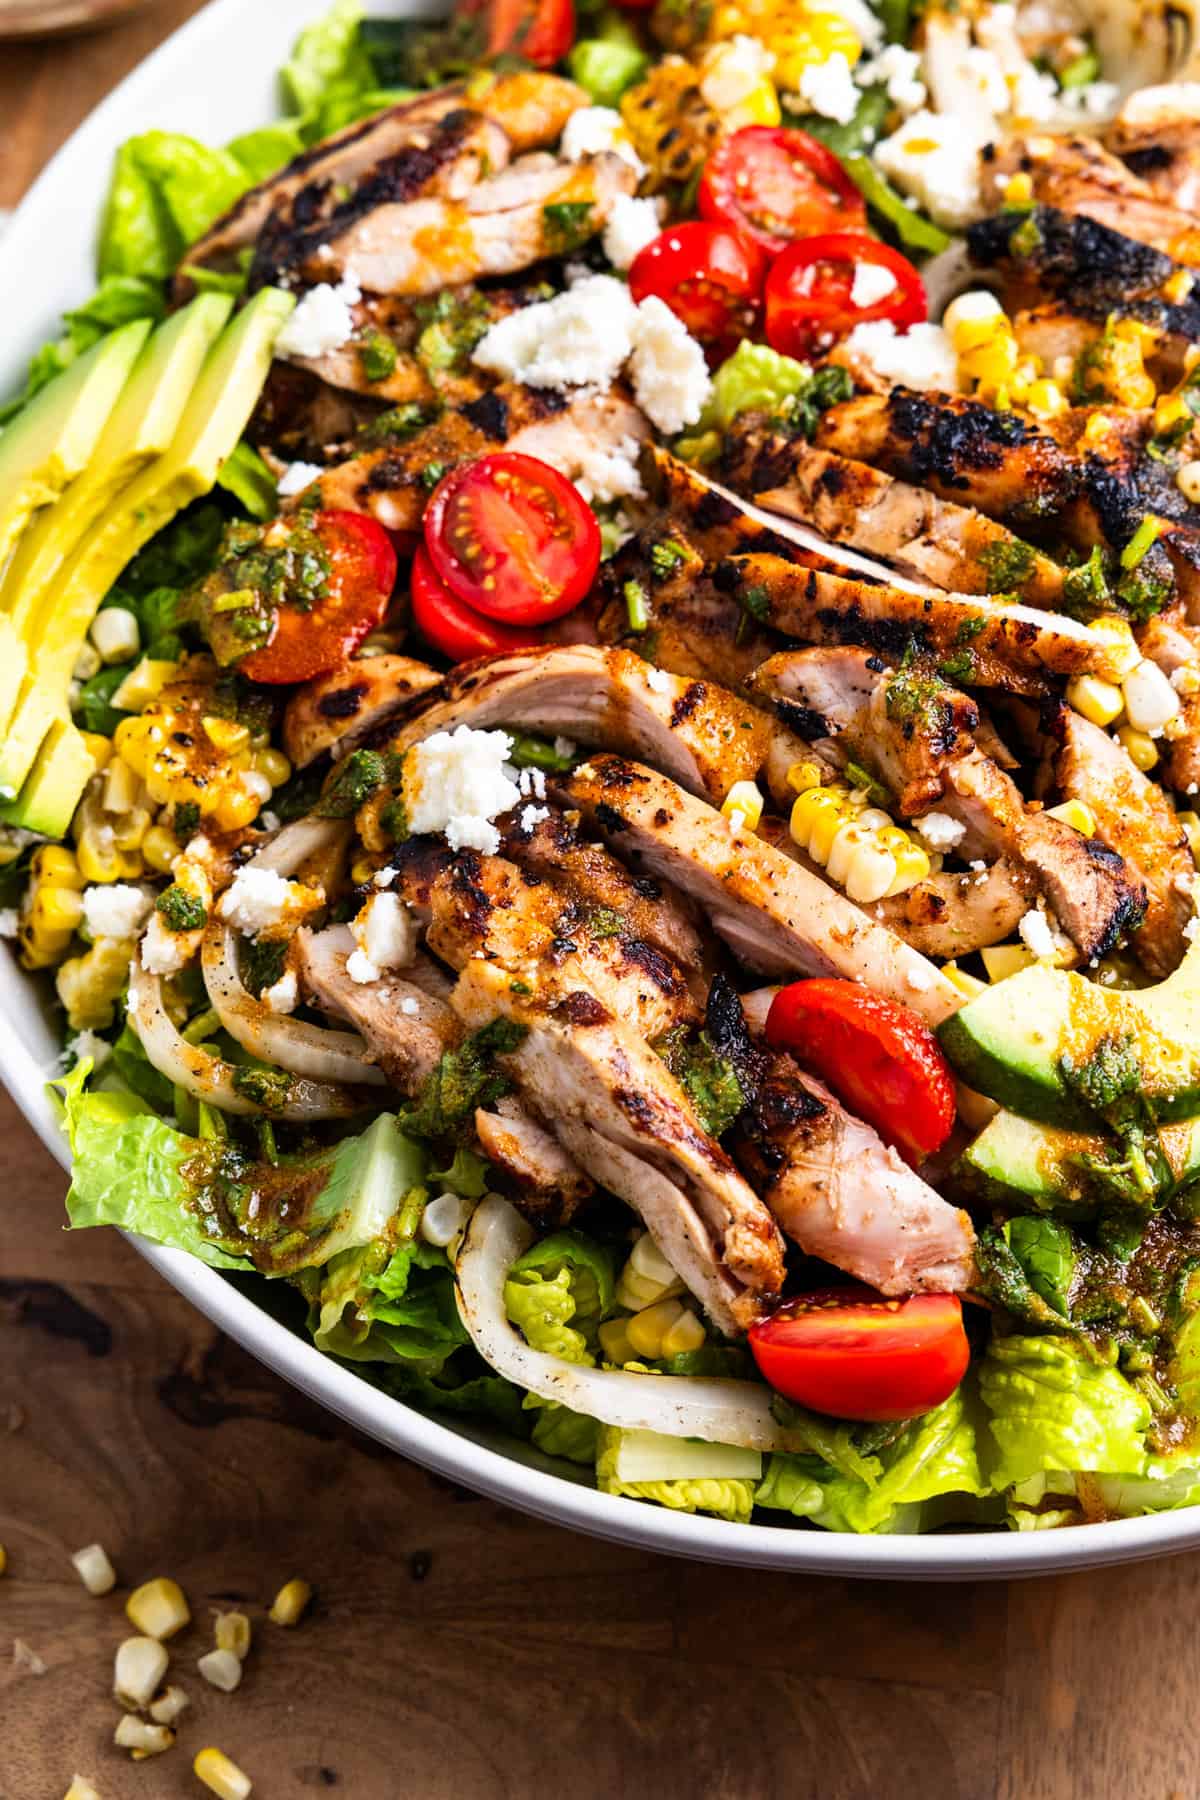 Bowl of sliced grilled chicken and fresh and grilled vegetables over lettuce for a salad.